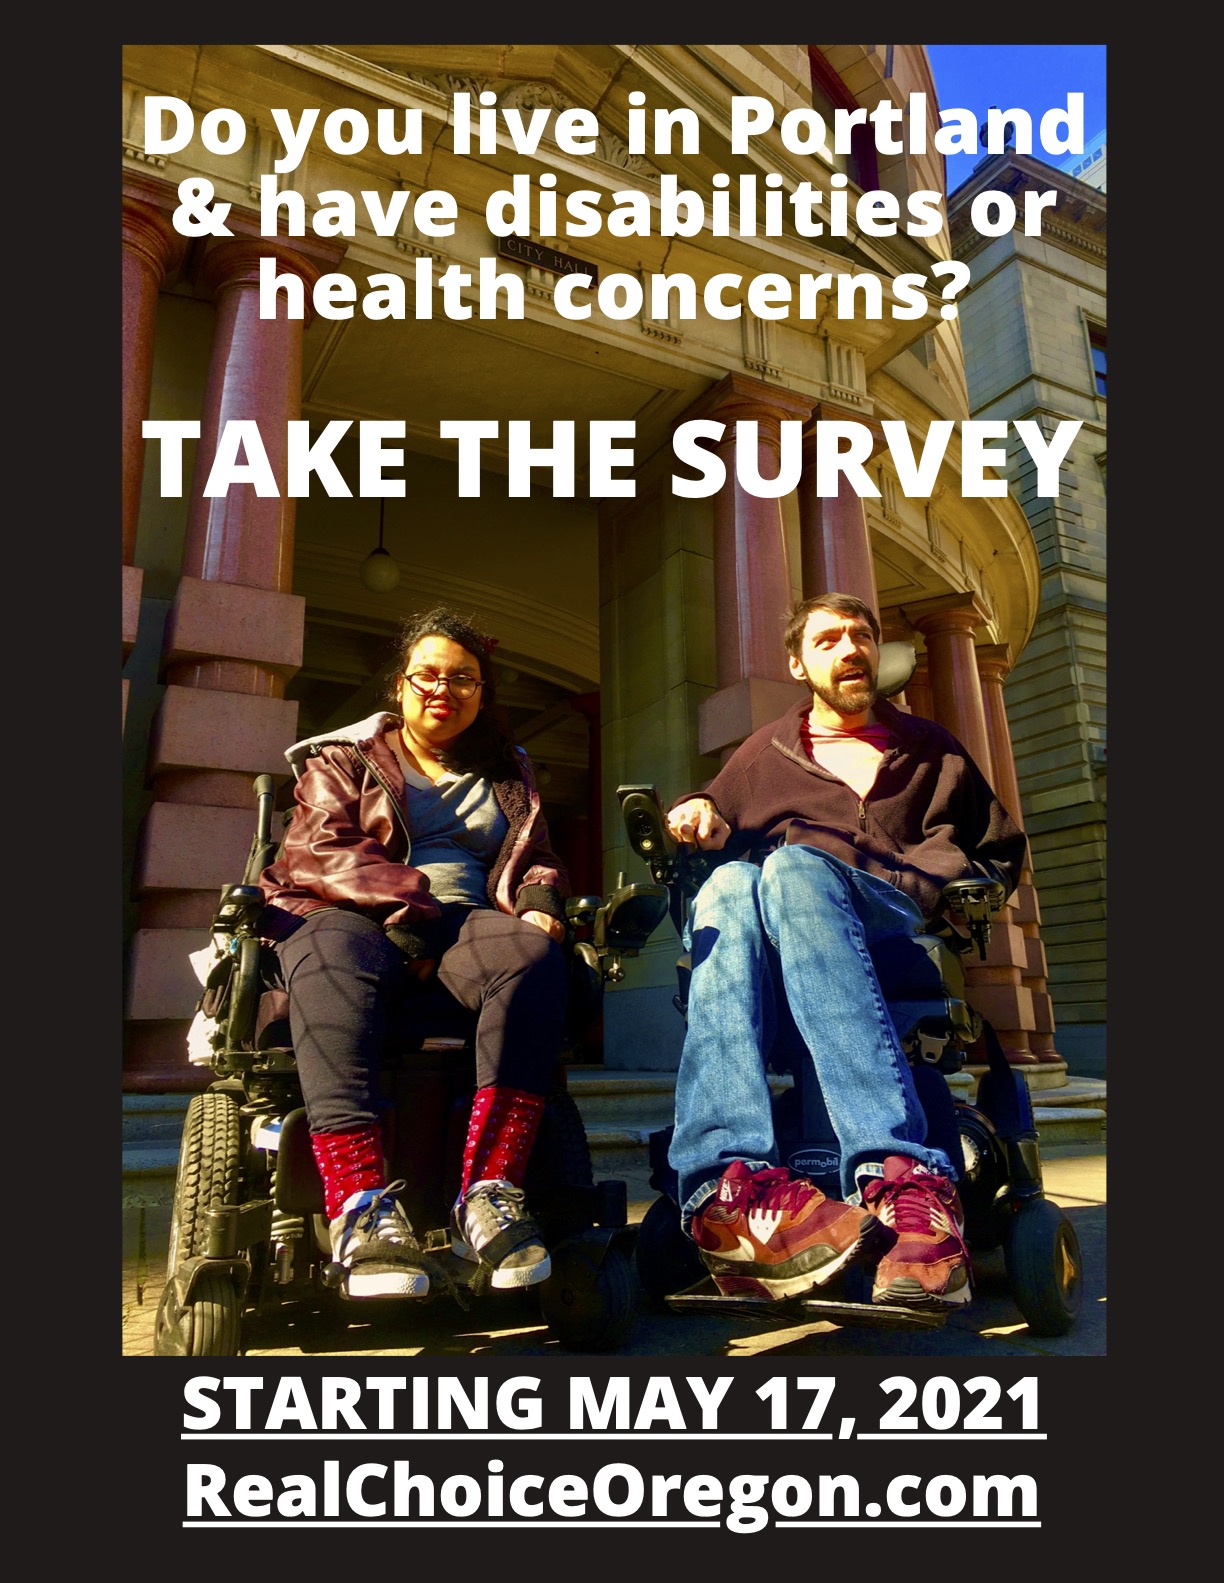 The text “Do you live in Portland & have disabilities or health concerns? TAKE THE SURVEY STARTING MAY 17, 2021 RealChoiceOregon.com” is overlaid throughout this image of two people with disabilities sitting in their power wheelchairs in front of Portland City Hall. One person is a brown Asian woman of color and the other is a nonbinary white person. They are both smiling and wearing warm clothes.